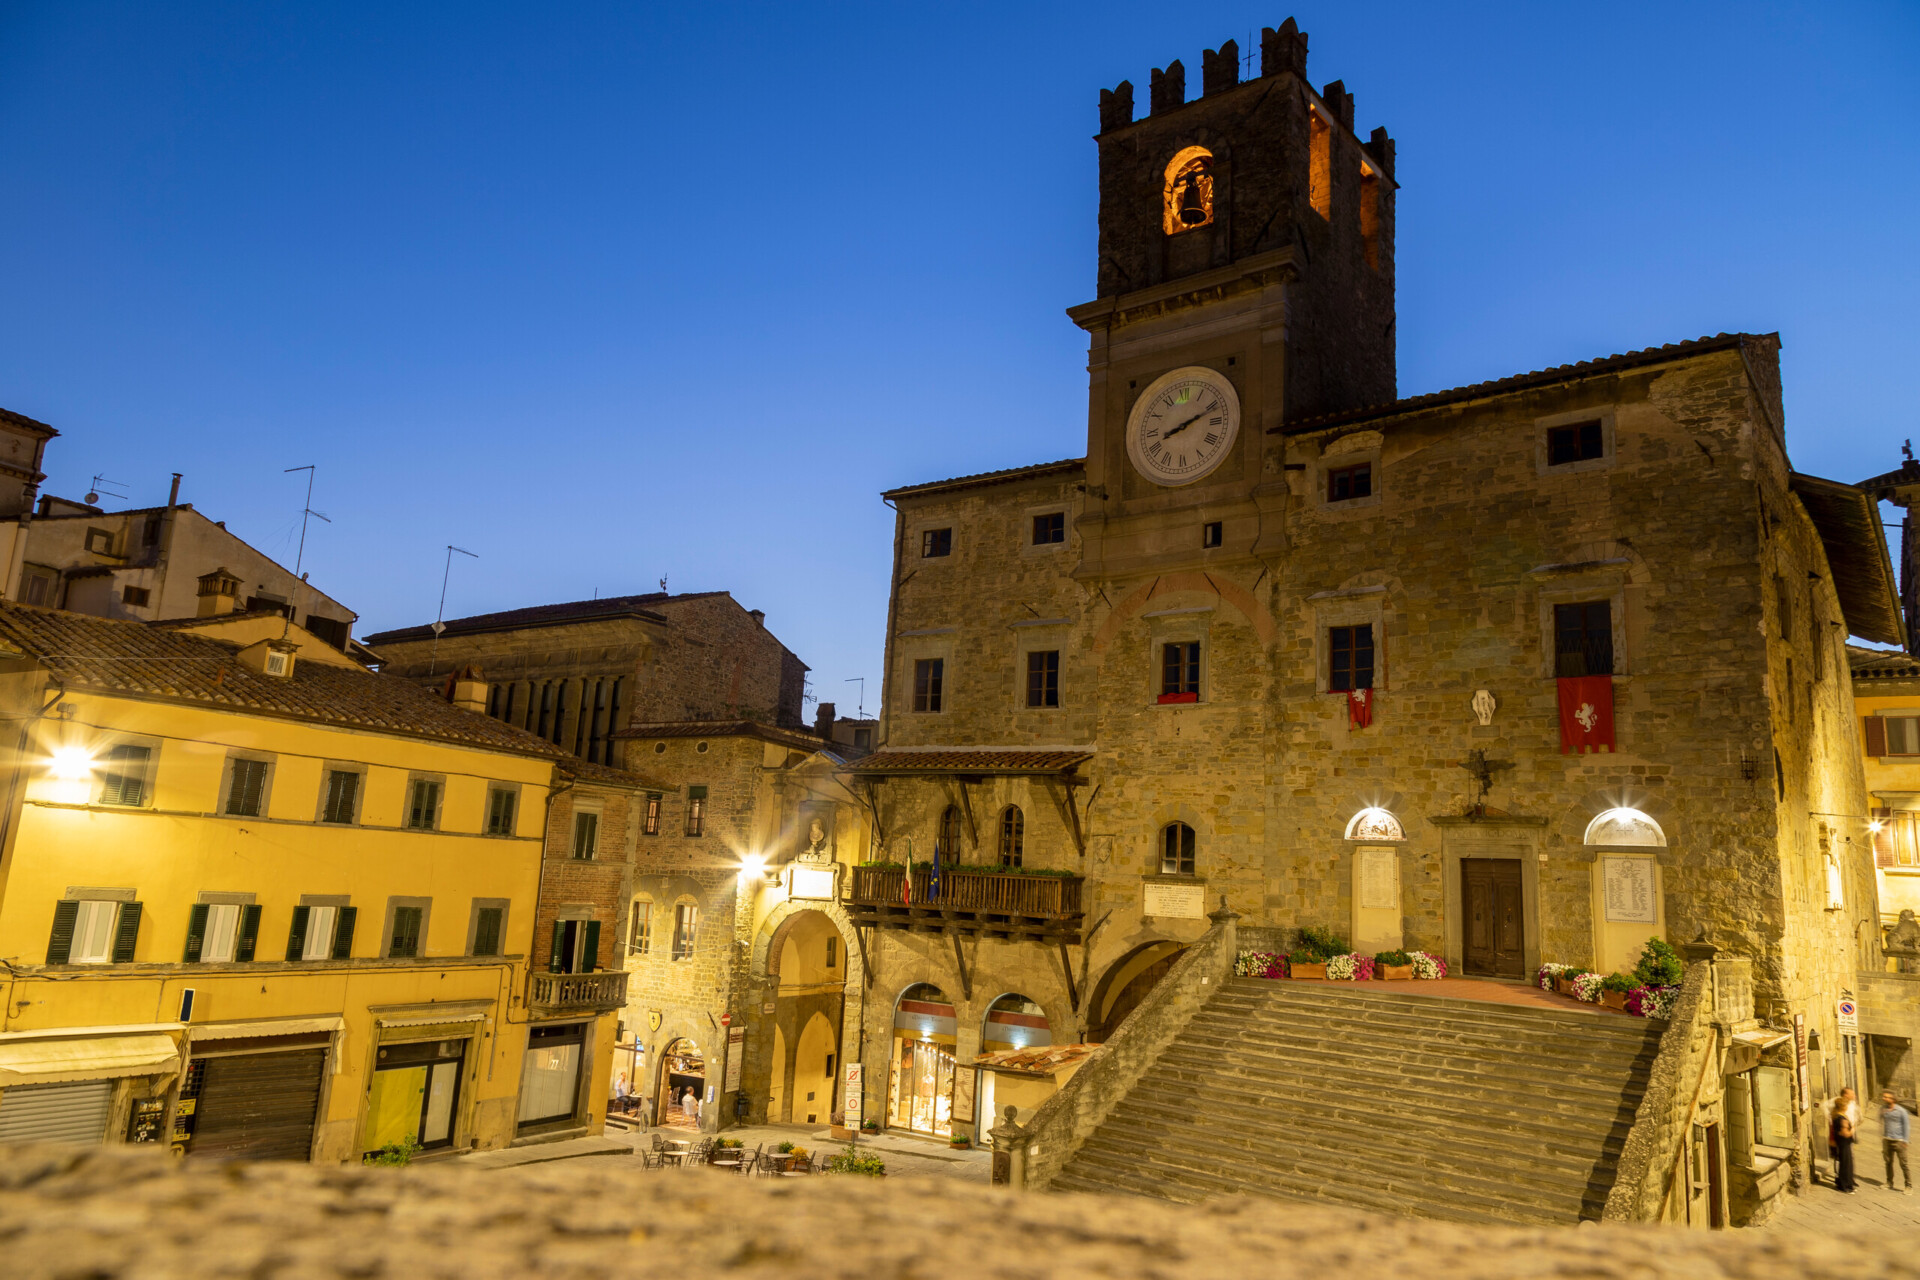 Night view of the town hall of Cortona site at the Republic Square.